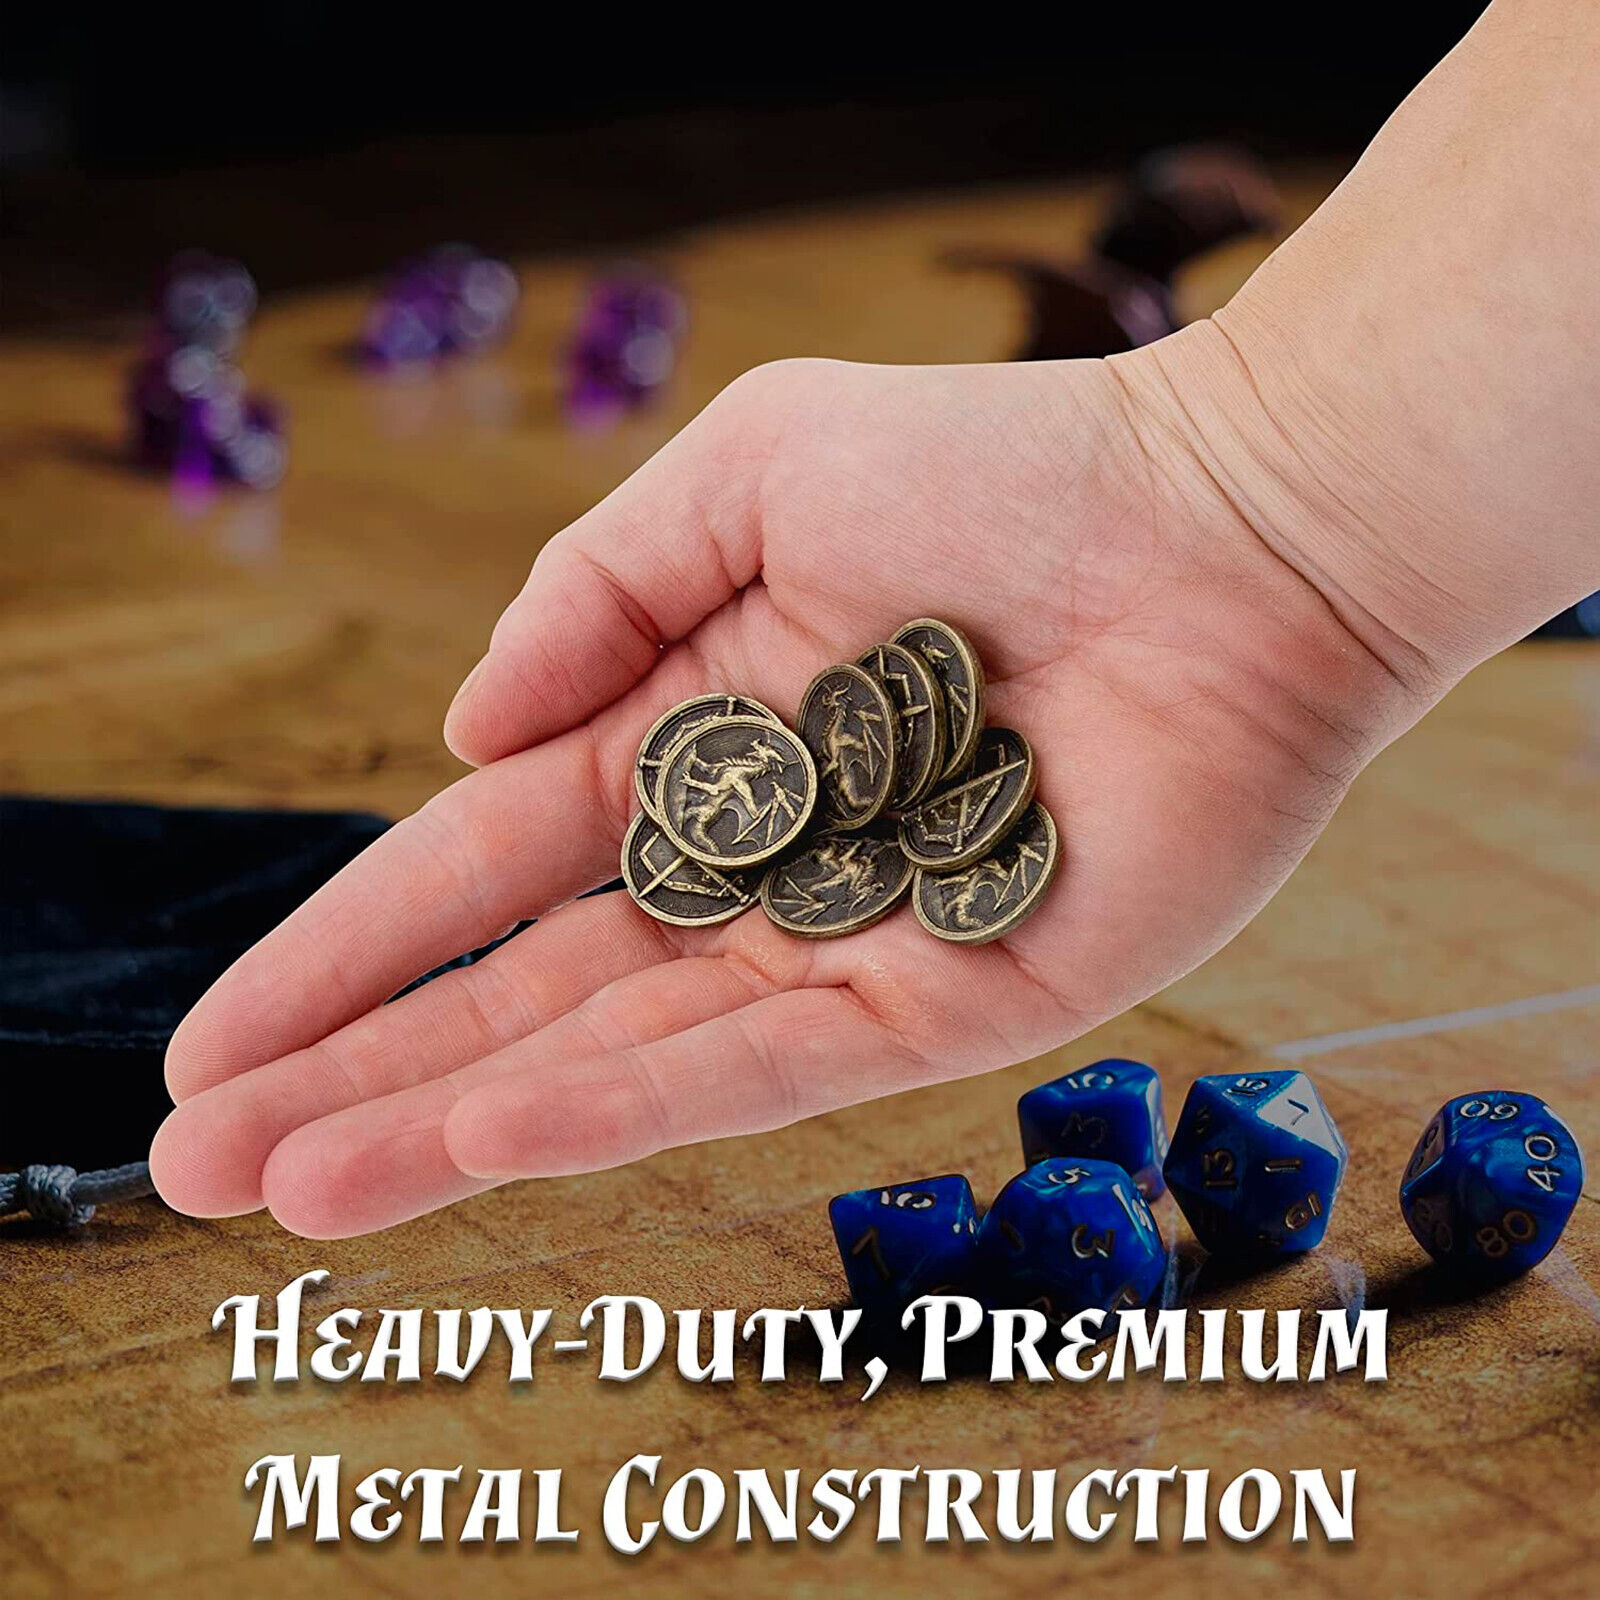 Metal coins for the board game Hegemonic | Currency design, Coins, Coin design